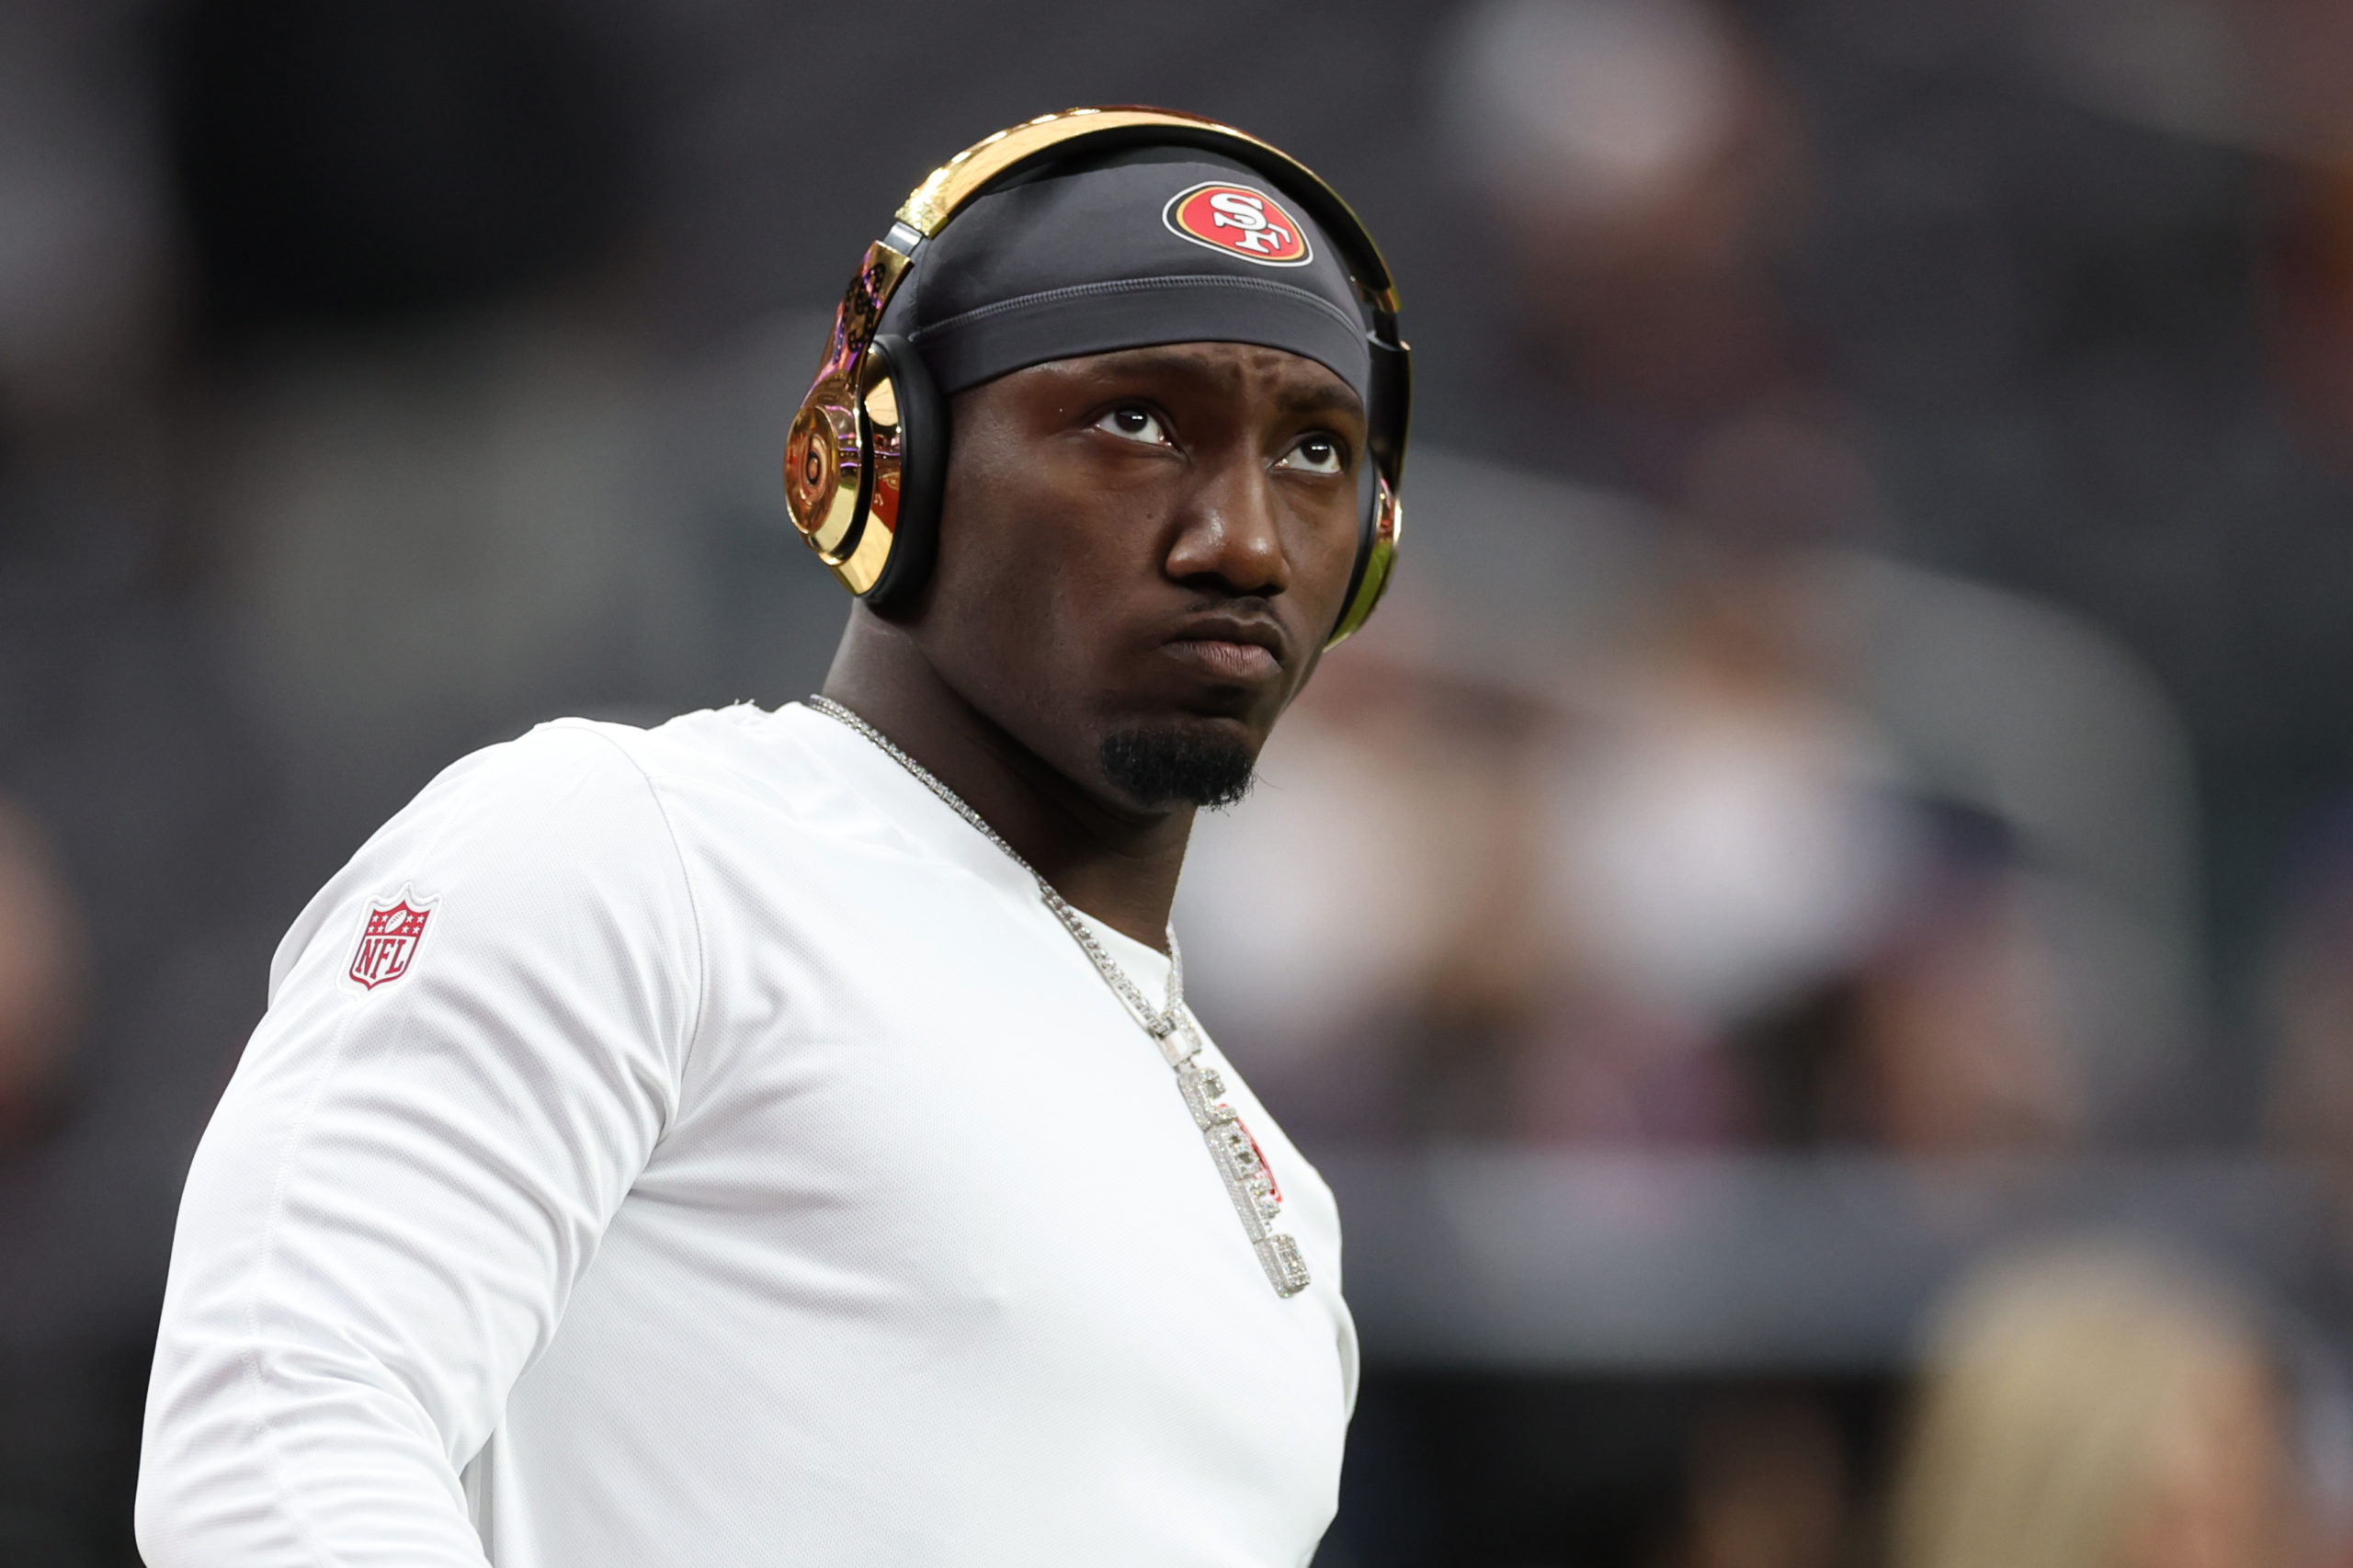 LAS VEGAS, NEVADA - FEBRUARY 11: Deebo Samuel #19 of the San Francisco 49ers warms-up before Super Bowl LVIII against the Kansas City Chiefs at Allegiant Stadium on February 11, 2024 in Las Vegas, Nevada. Ezra Shaw/Getty Images